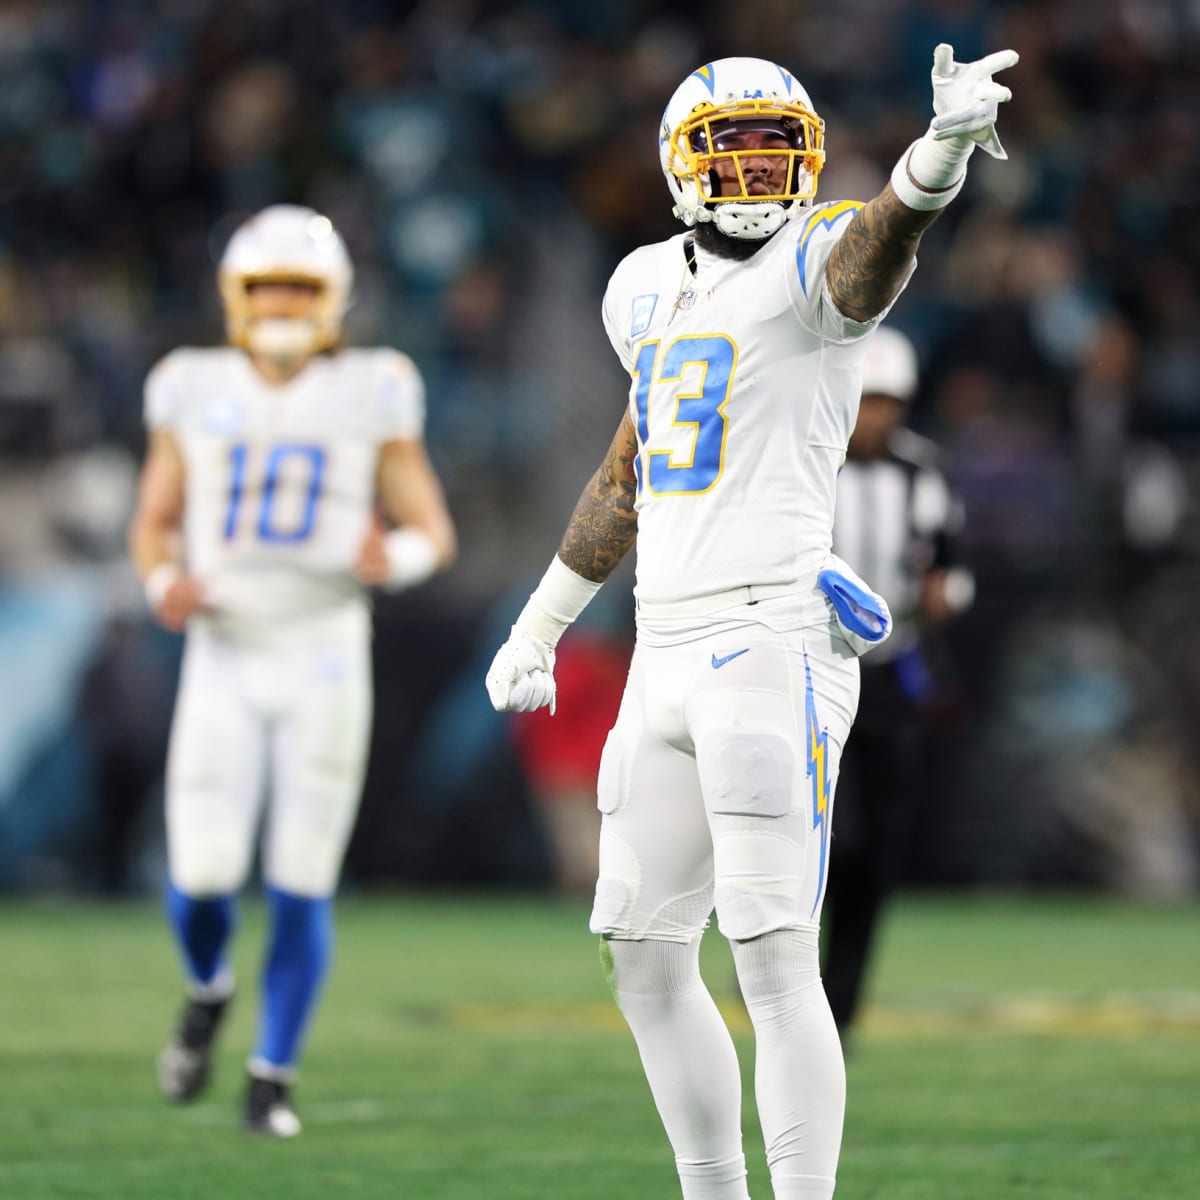 Chargers' Uniform Schedule for 2023 Season Revealed - Sports